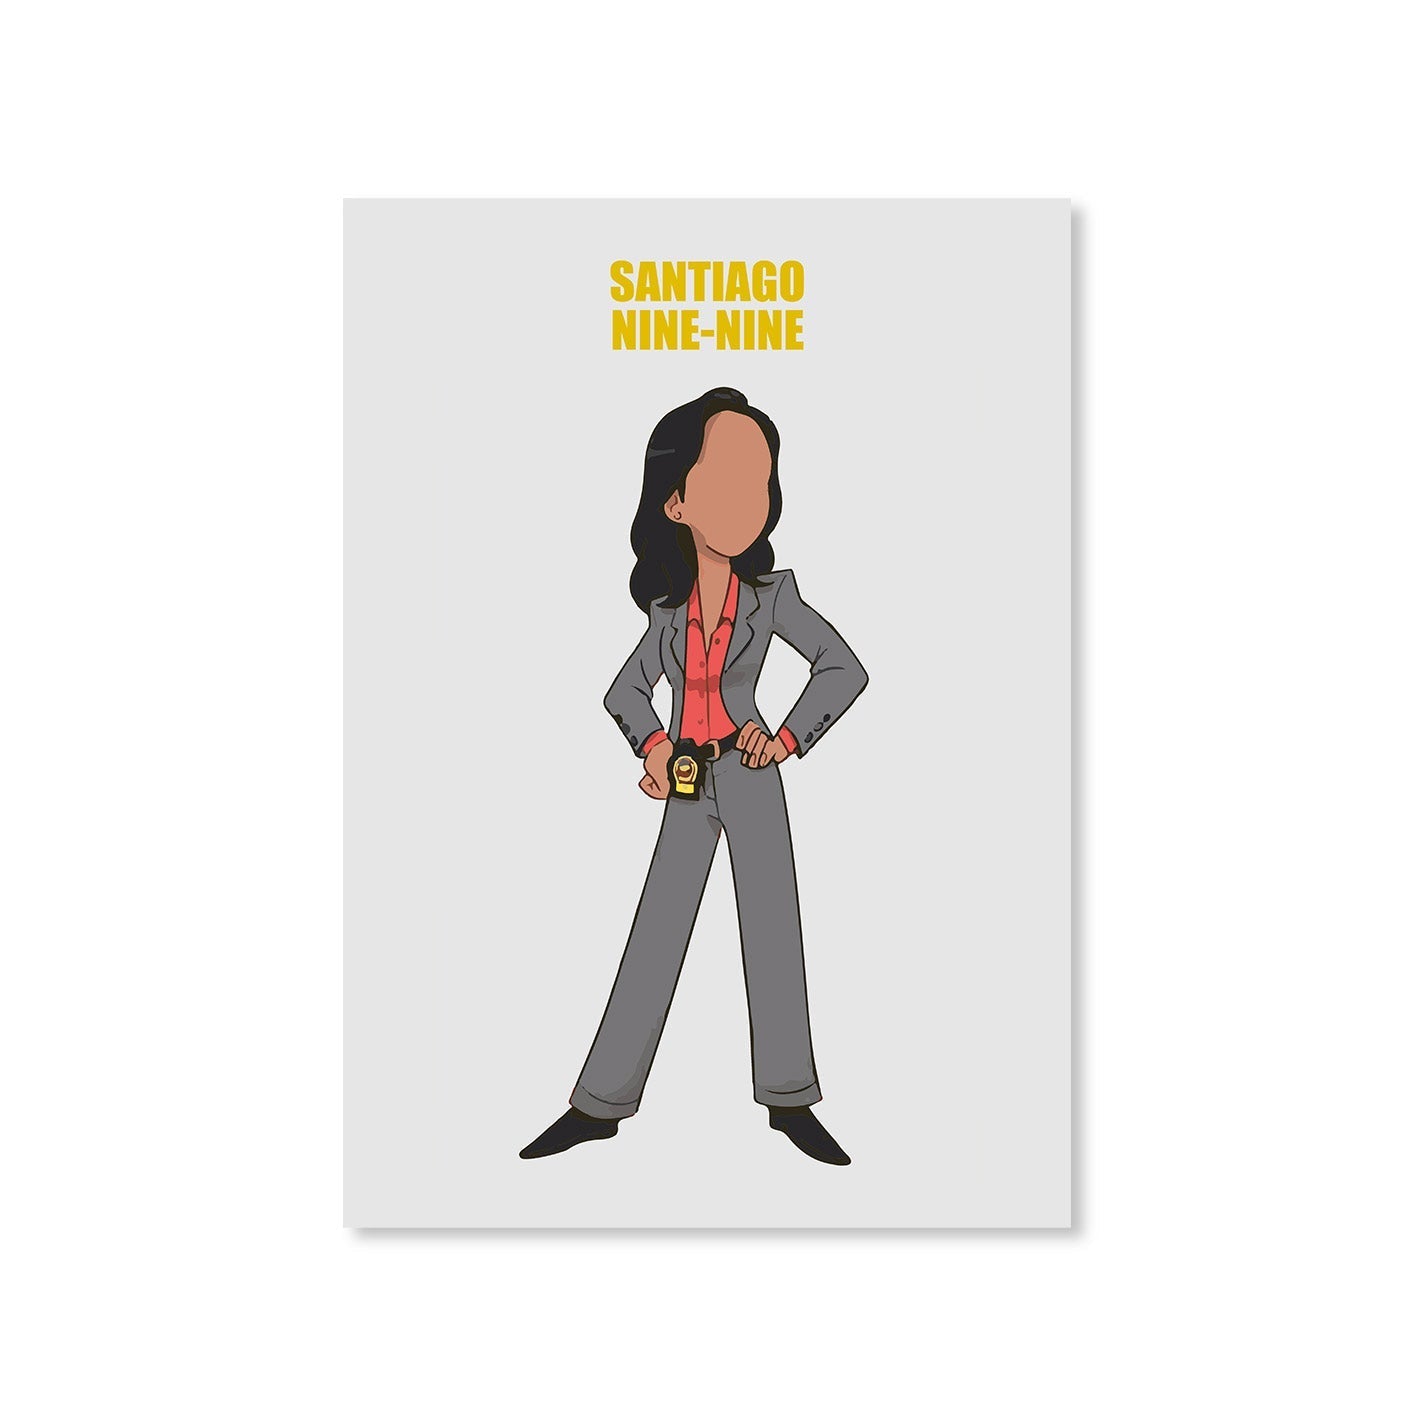 brooklyn nine-nine santiago nine-nine poster wall art buy online united states of america usa the banyan tee tbt a4 stranger things eleven demogorgon shadow monster dustin quote vector art clothing accessories merchandise